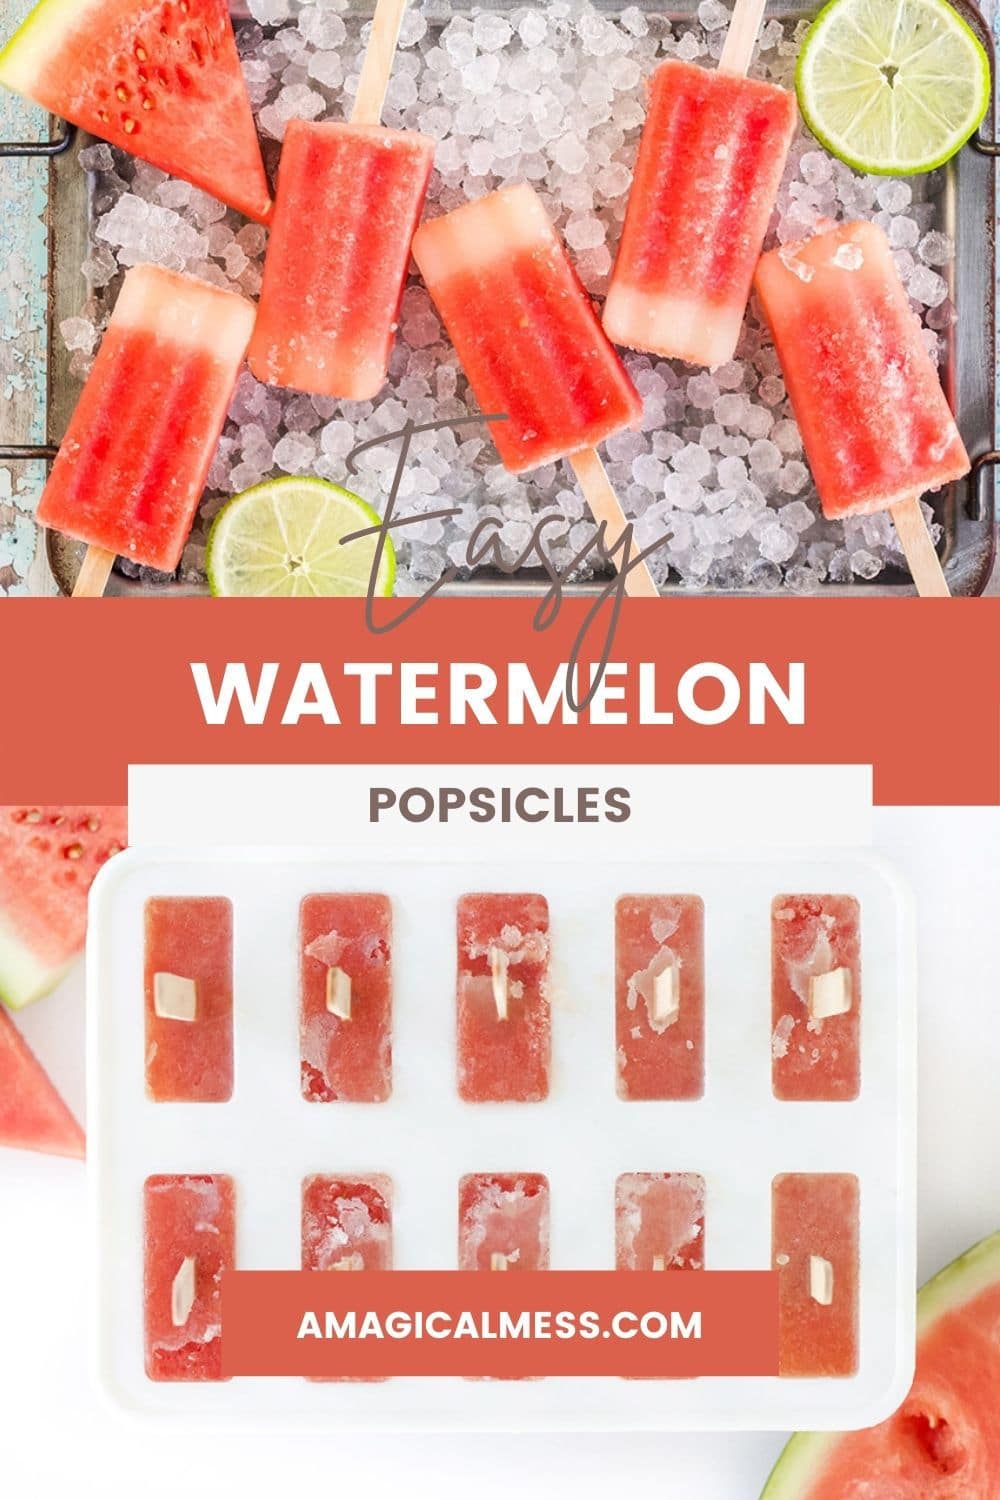 Watermelon pops on a tray with ice and in a popsicle mold.